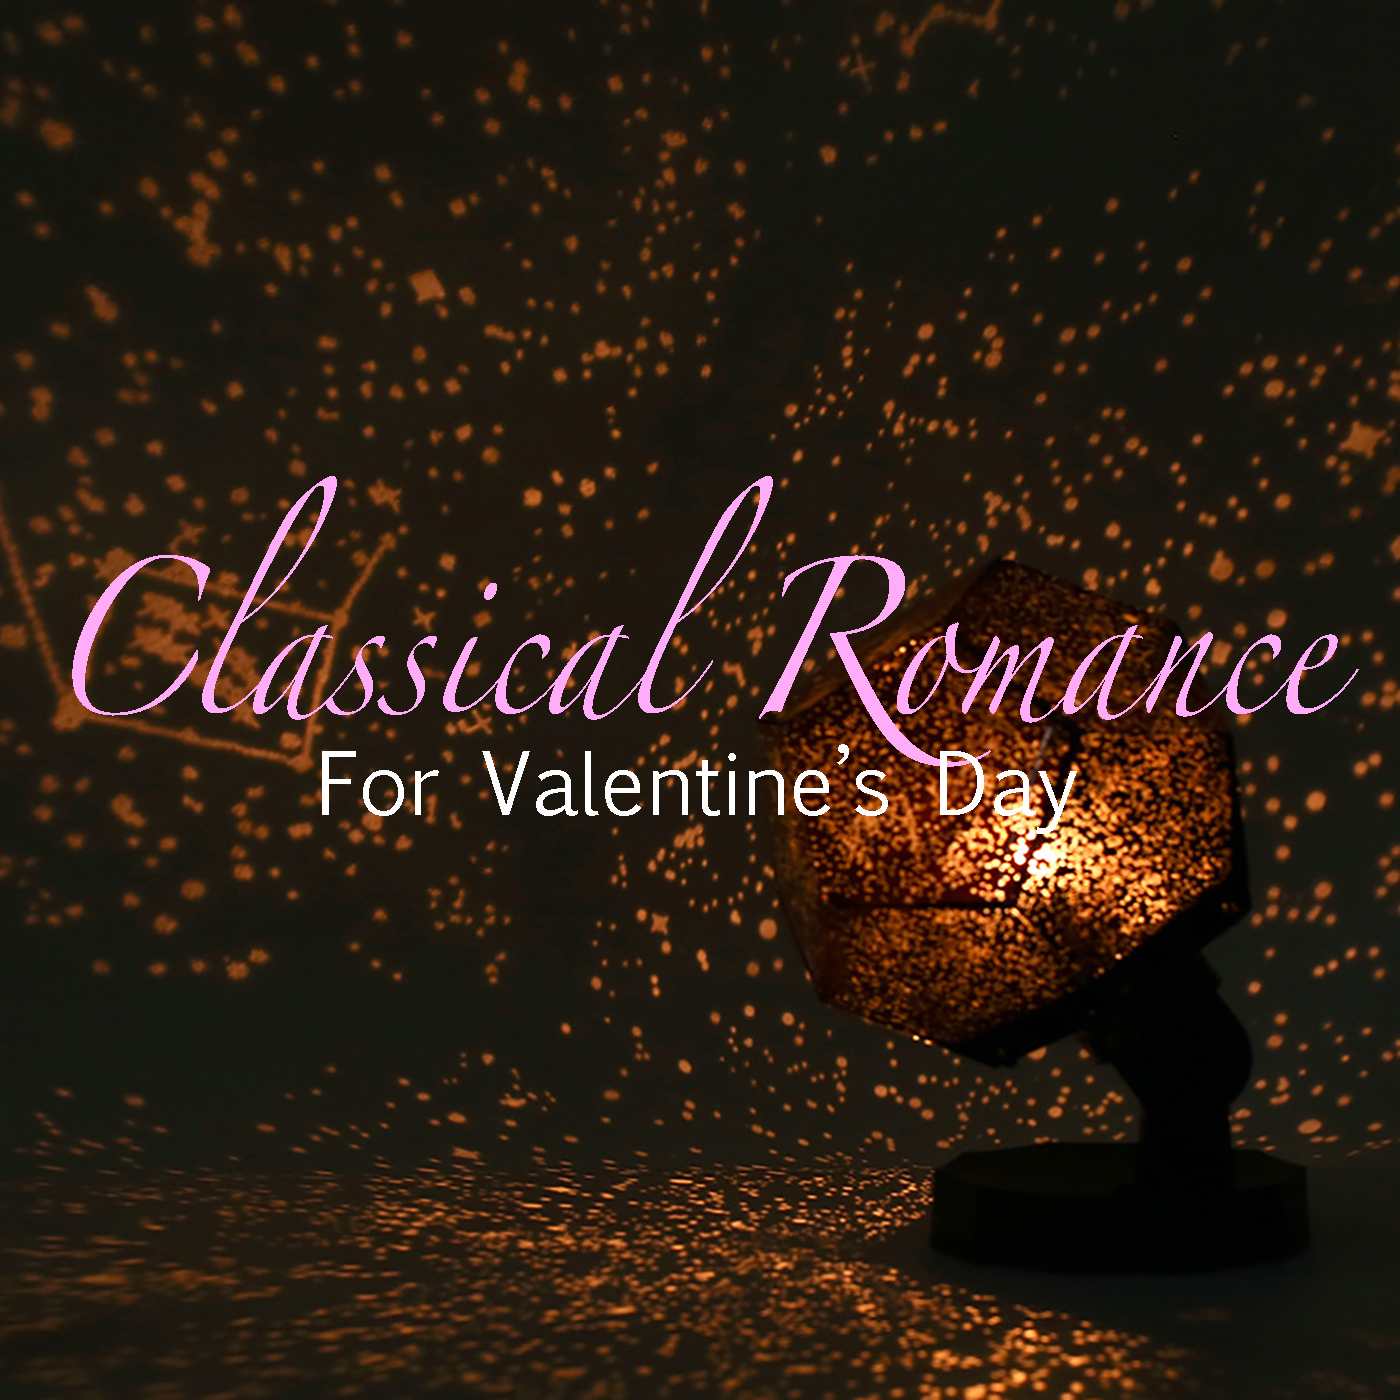 Classical Romance For Valentine's Day